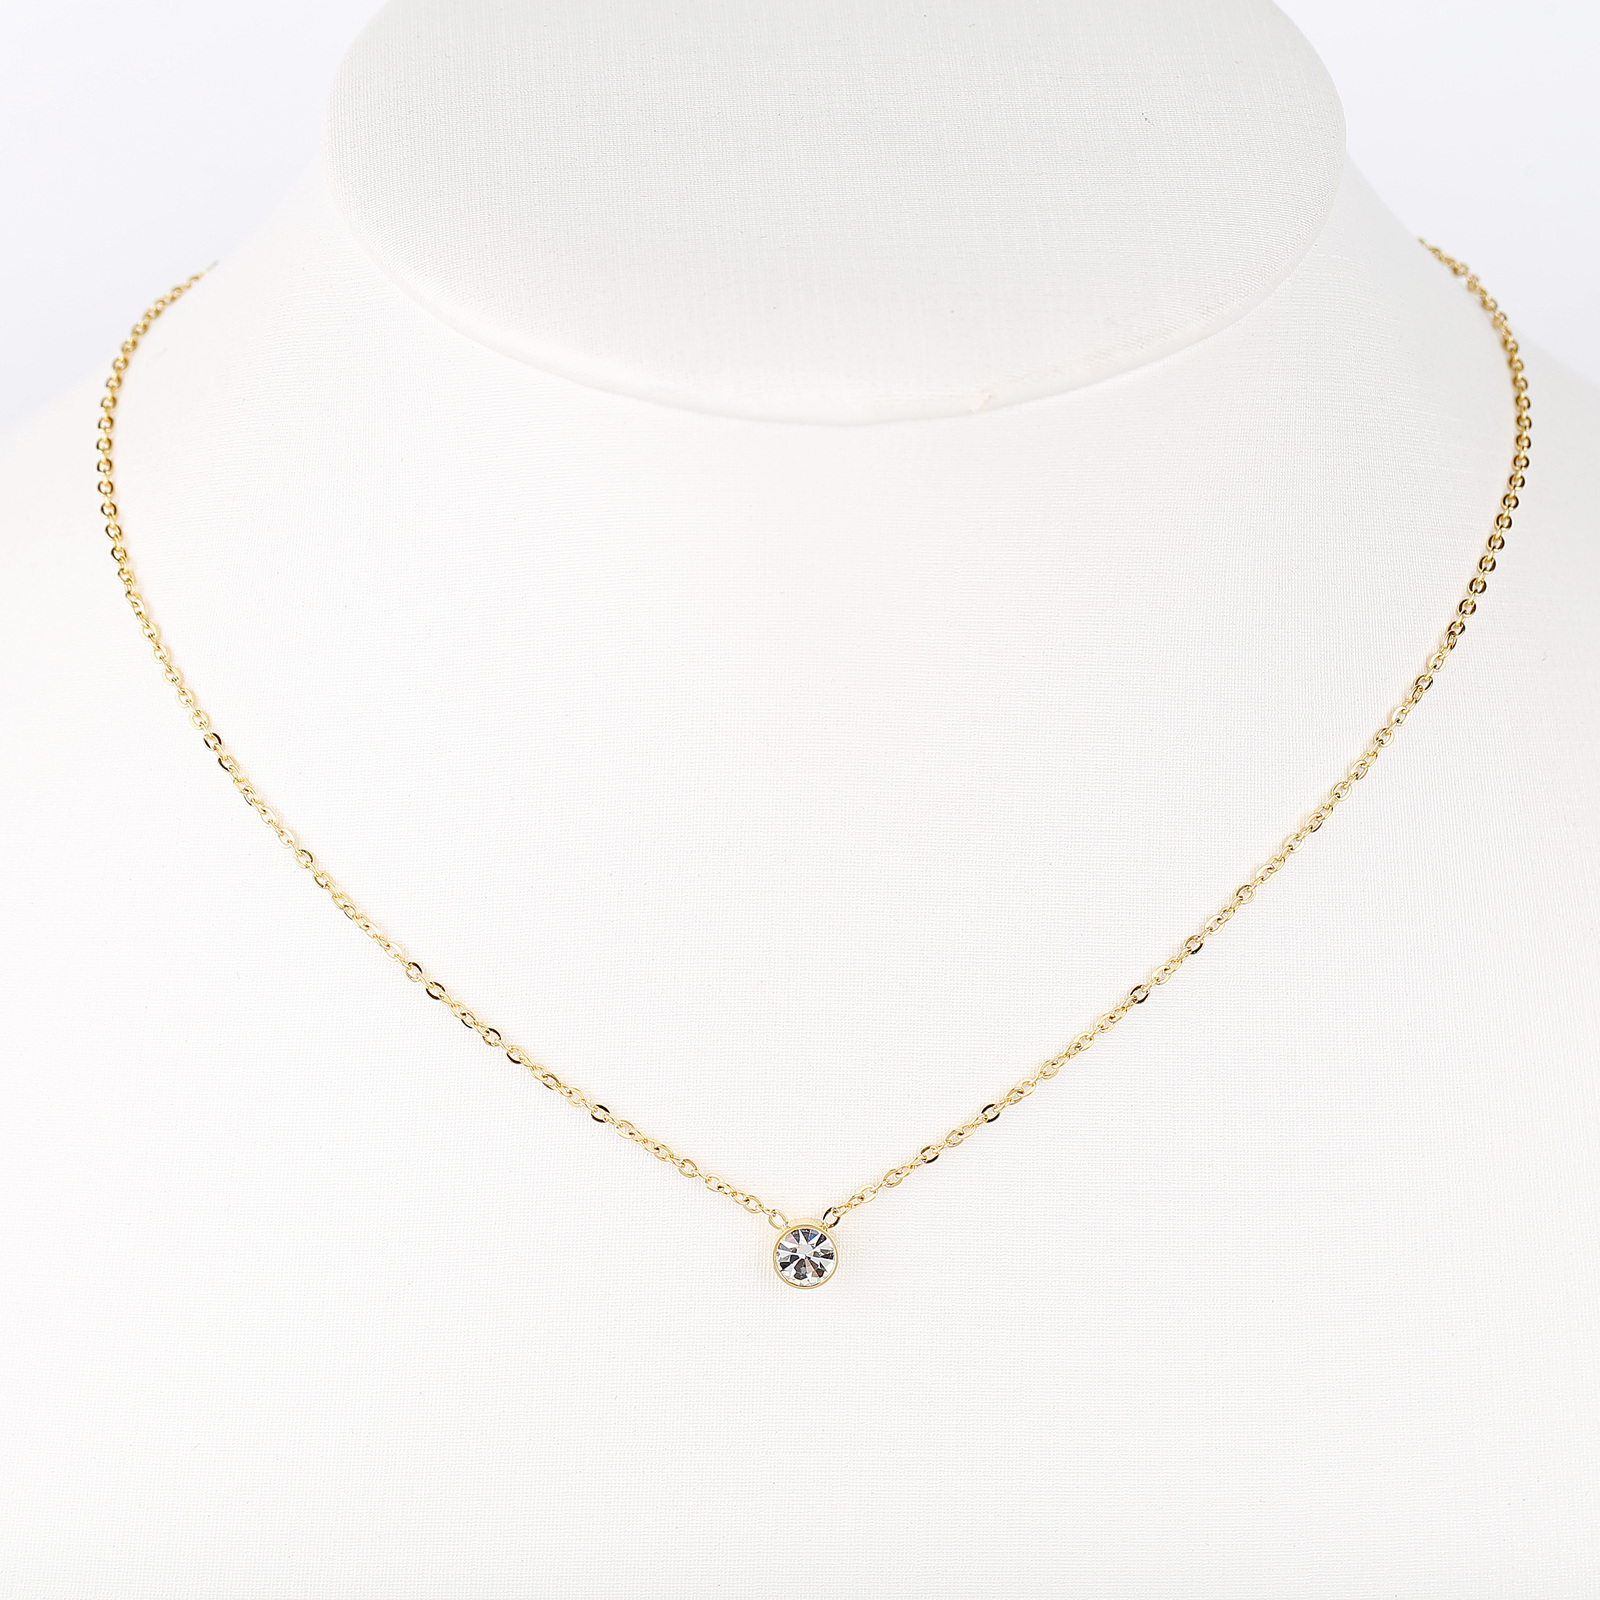 gold tone solitaire necklace with swarovski style crystal